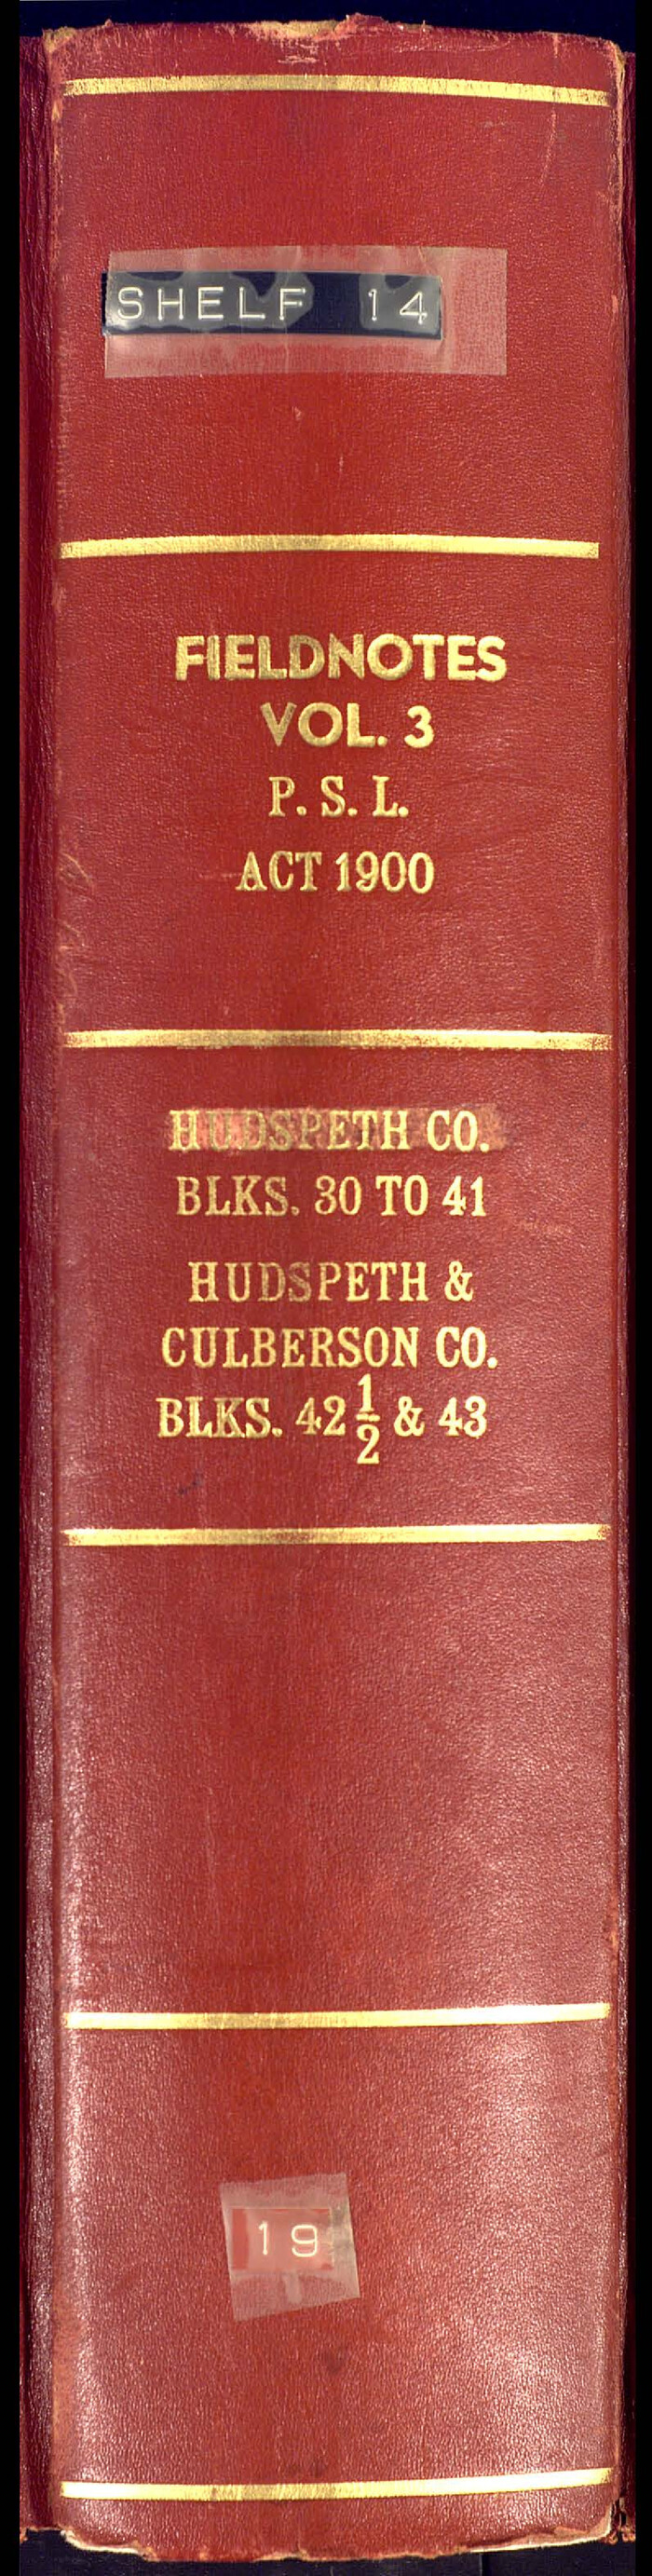 81660, PSF Field Notes for Blocks 42 1/2 and 43 in Culberson and Hudspeth Counties, and Blocks 30 through 41 in Hudspeth County, General Map Collection